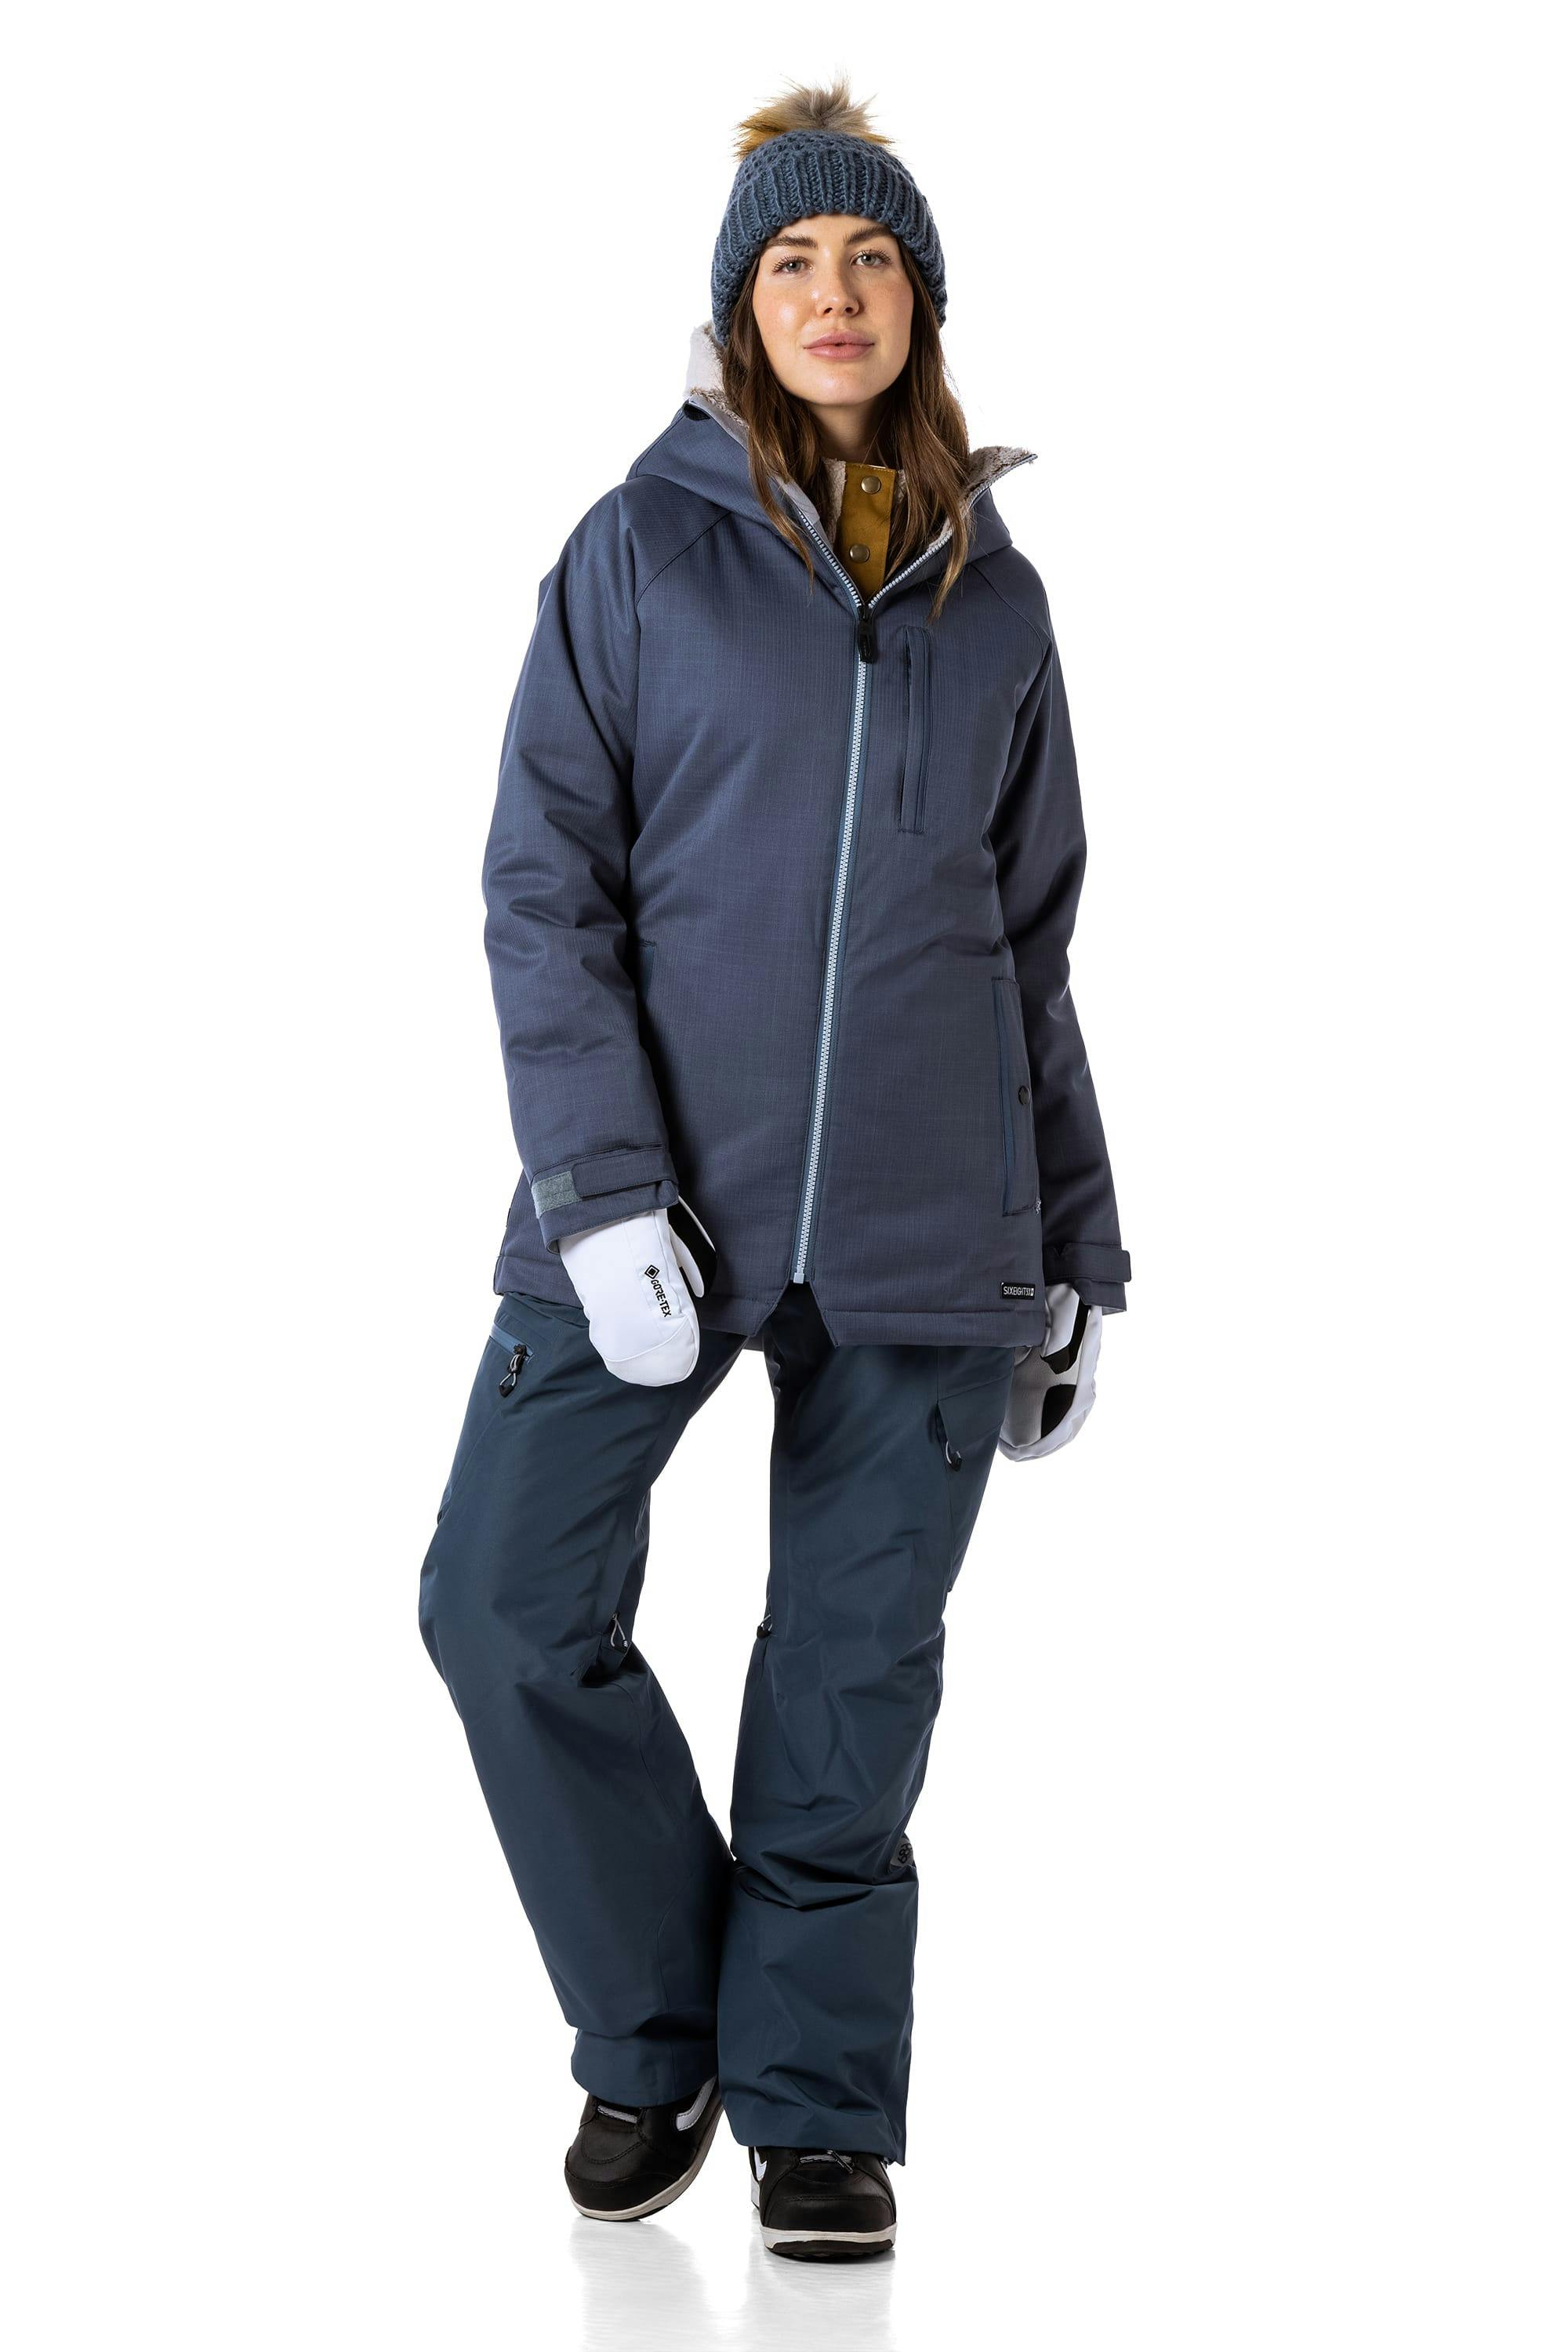 686 Women's Geode Thermagraph Pant